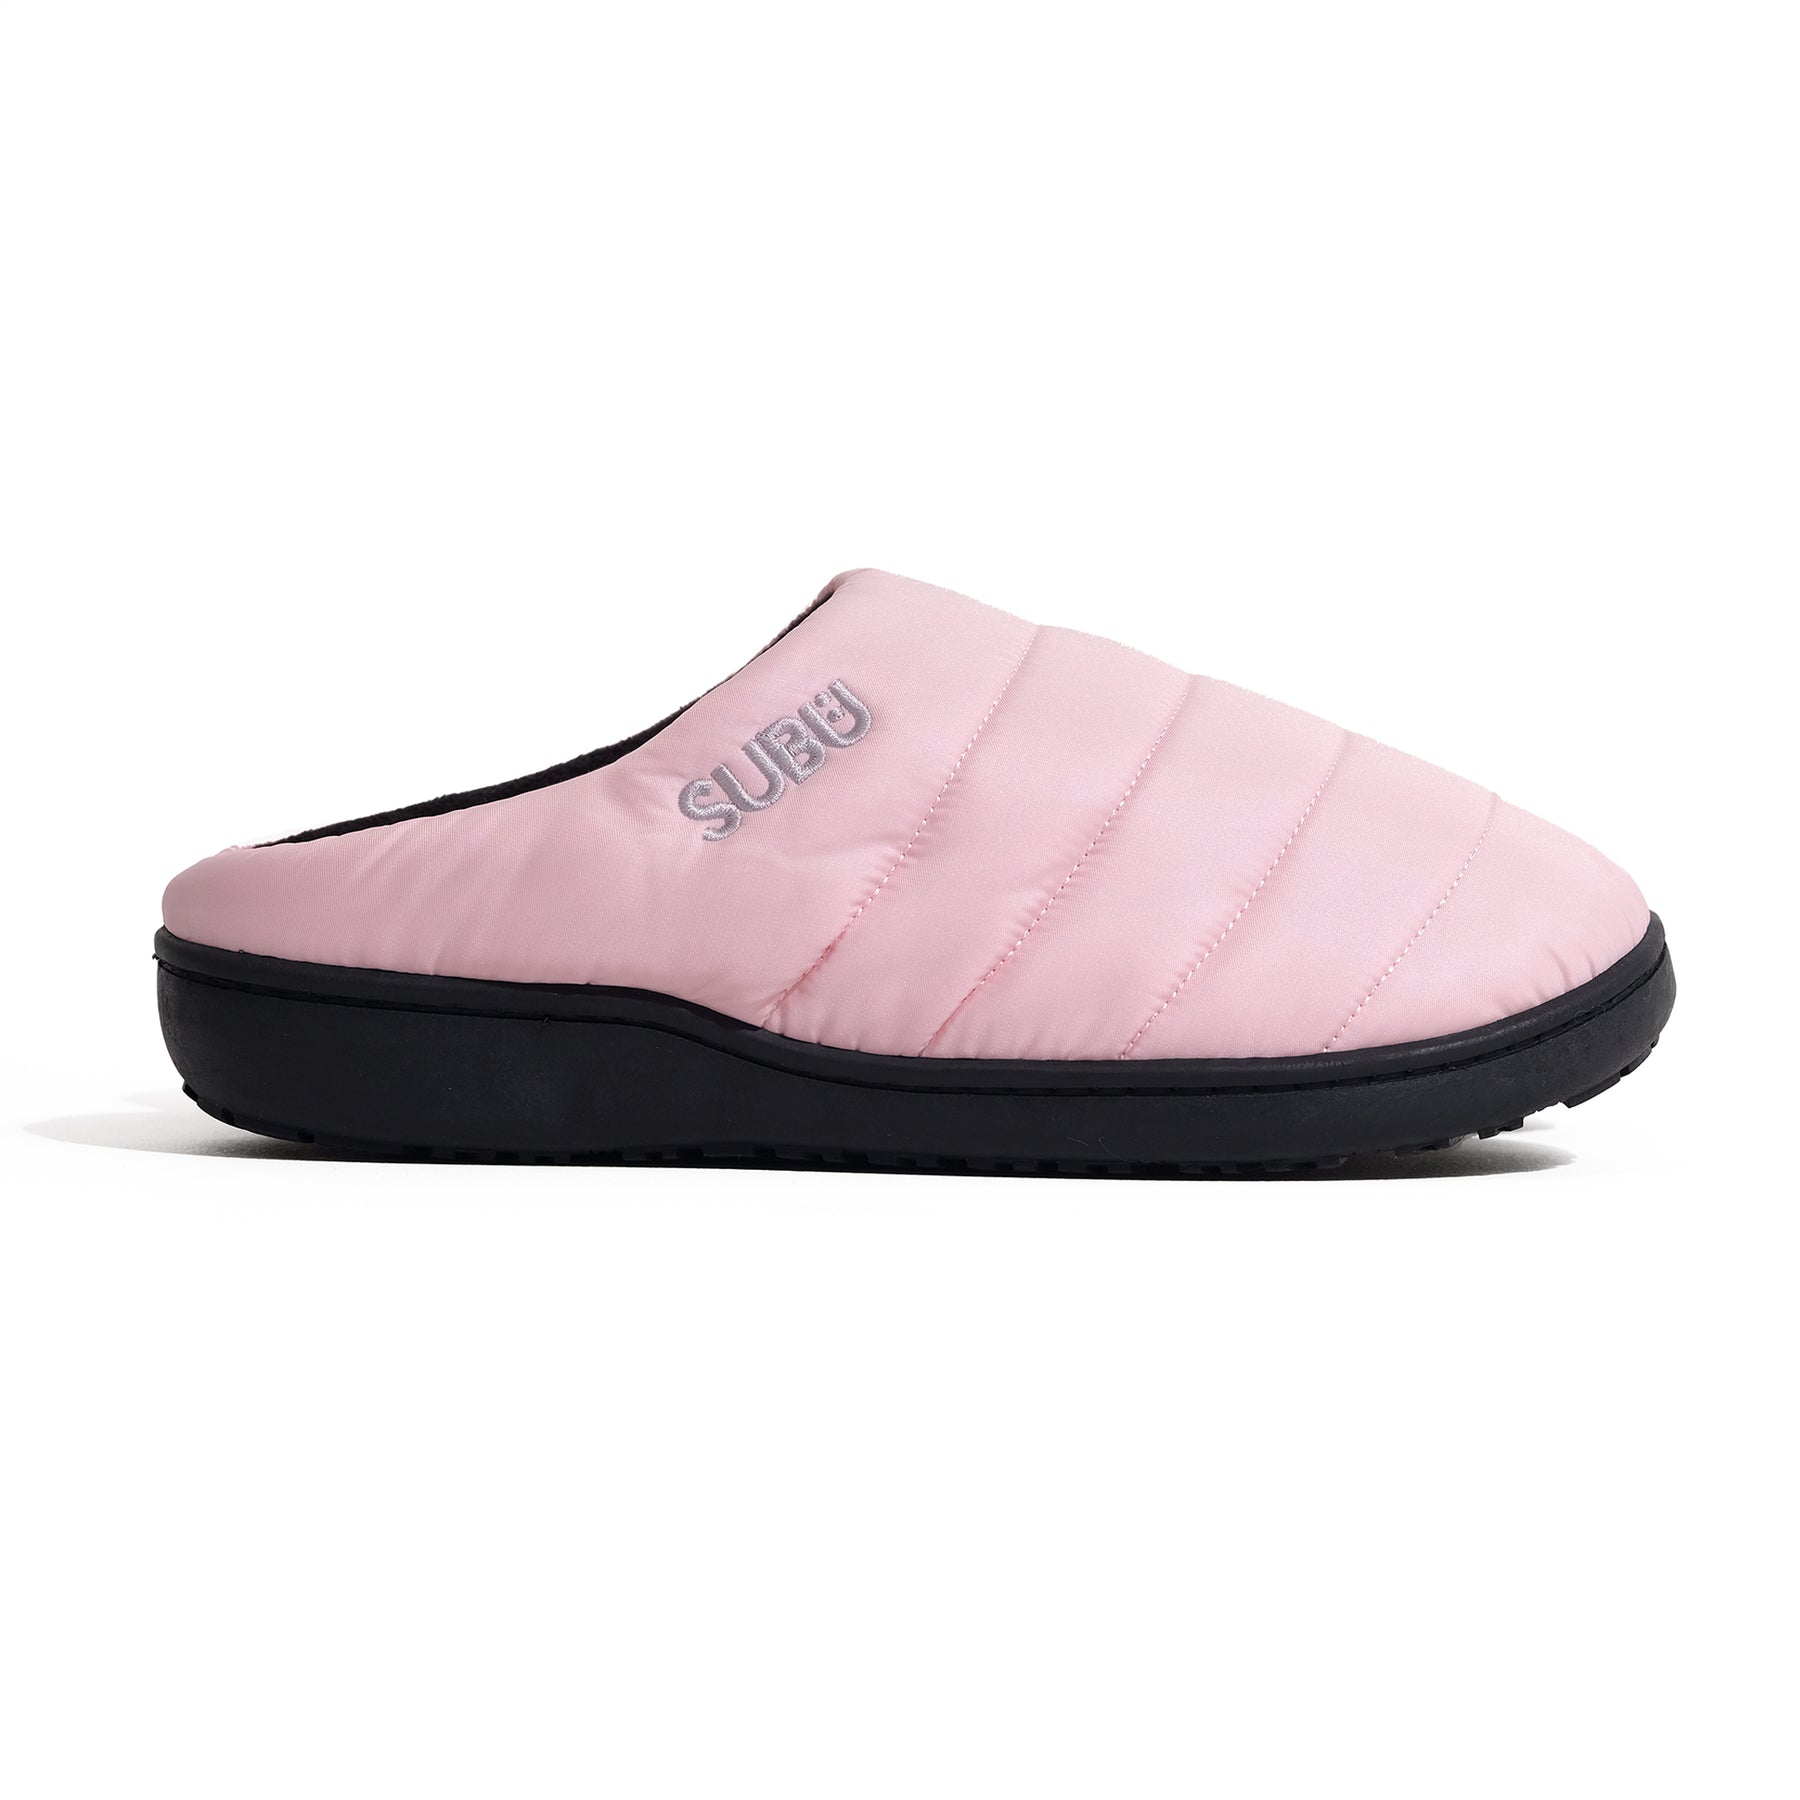 SUBU, Fall & Winter Slippers Pink, Size, 3, Slippers,